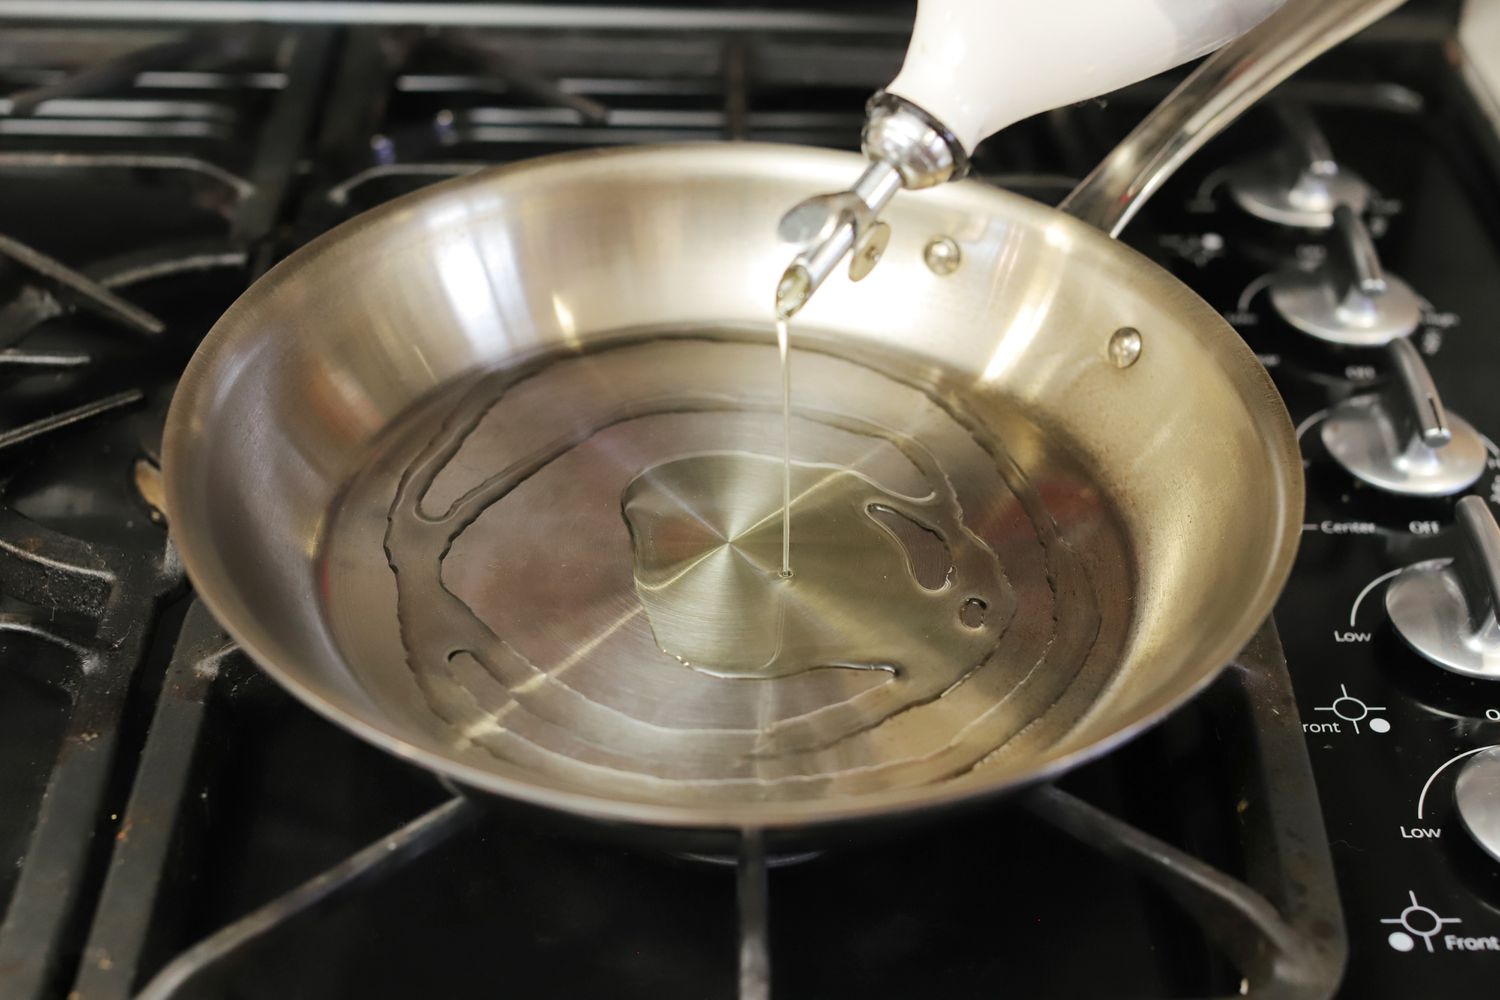 Drizzling oil into the All-Clad G5 frying pan on a gas stove